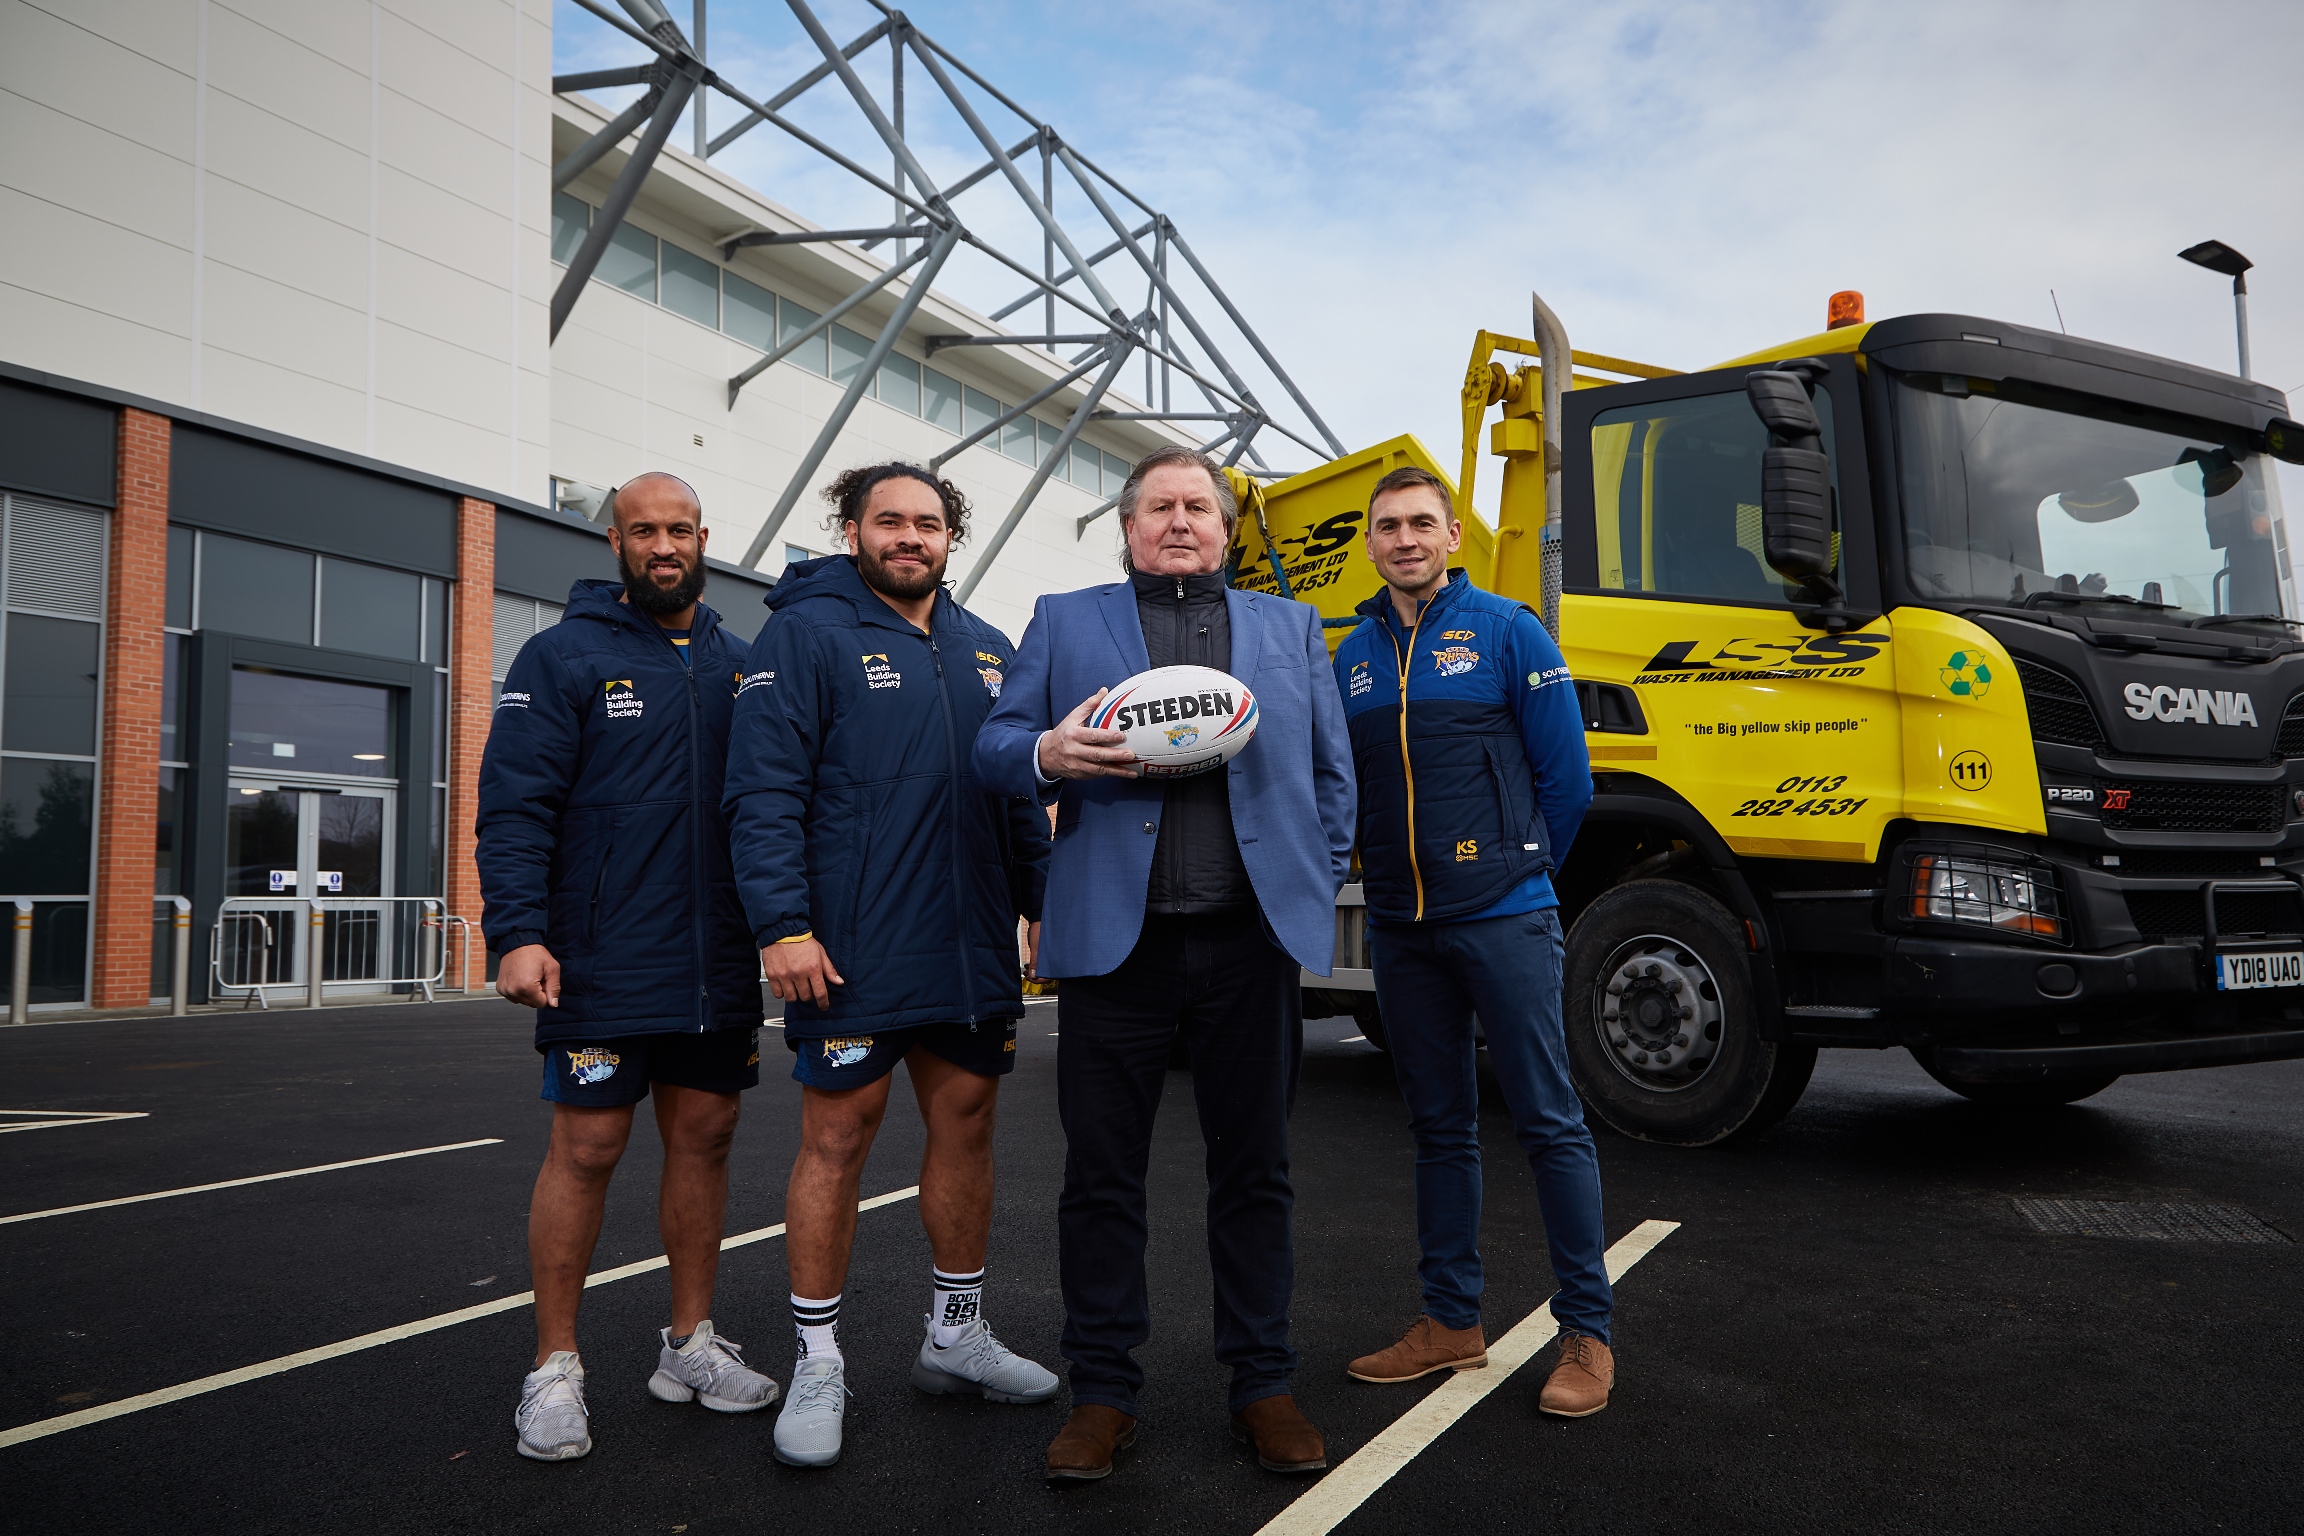 LSS WASTE MANAGEMENT SIGNS UP WITH LEEDS RHINOS